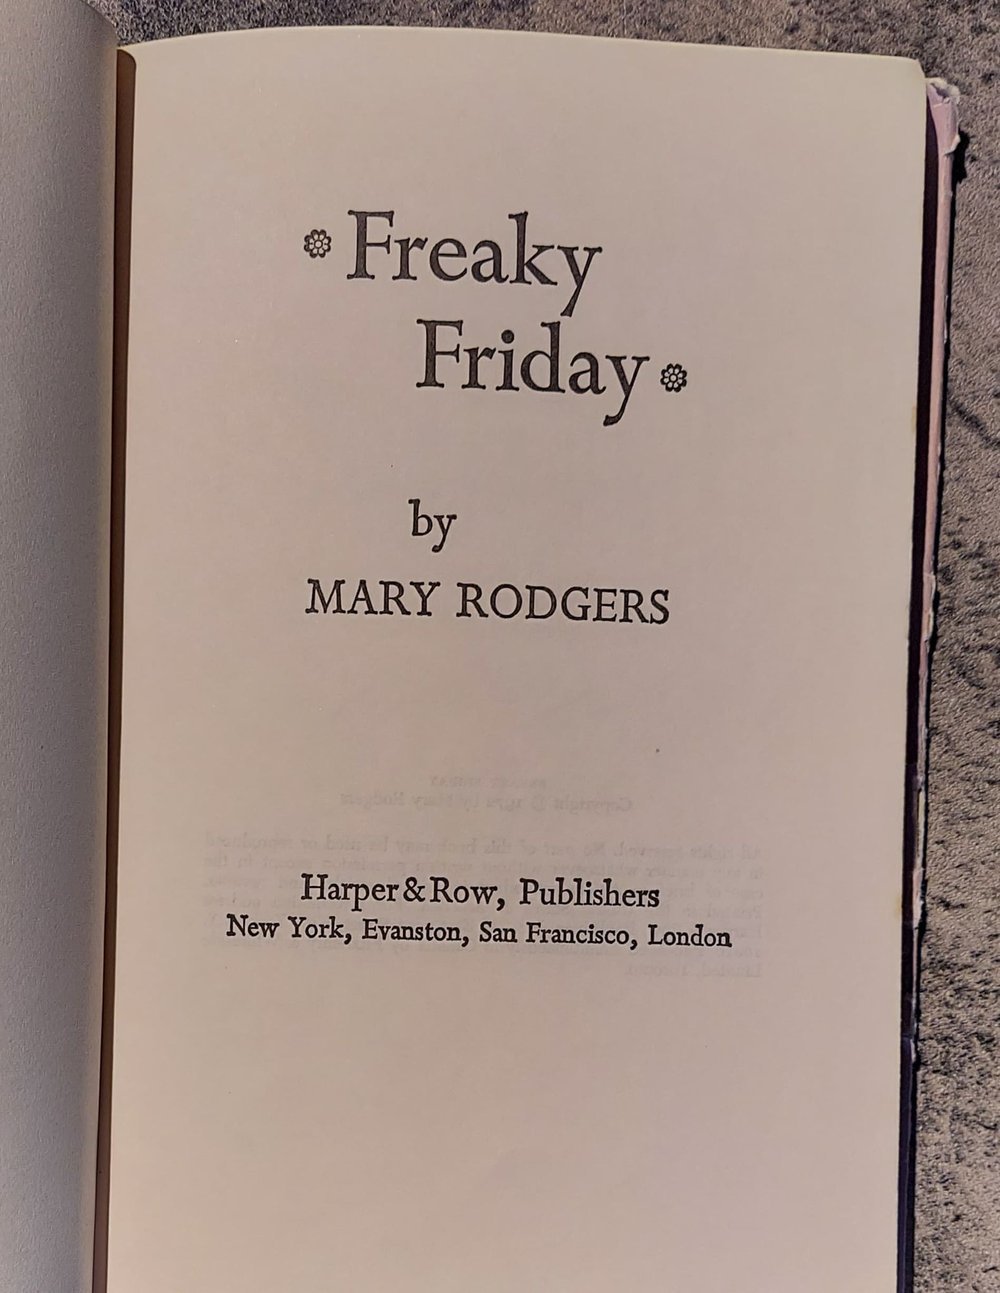 Freaky Friday, by Mary Rodgers